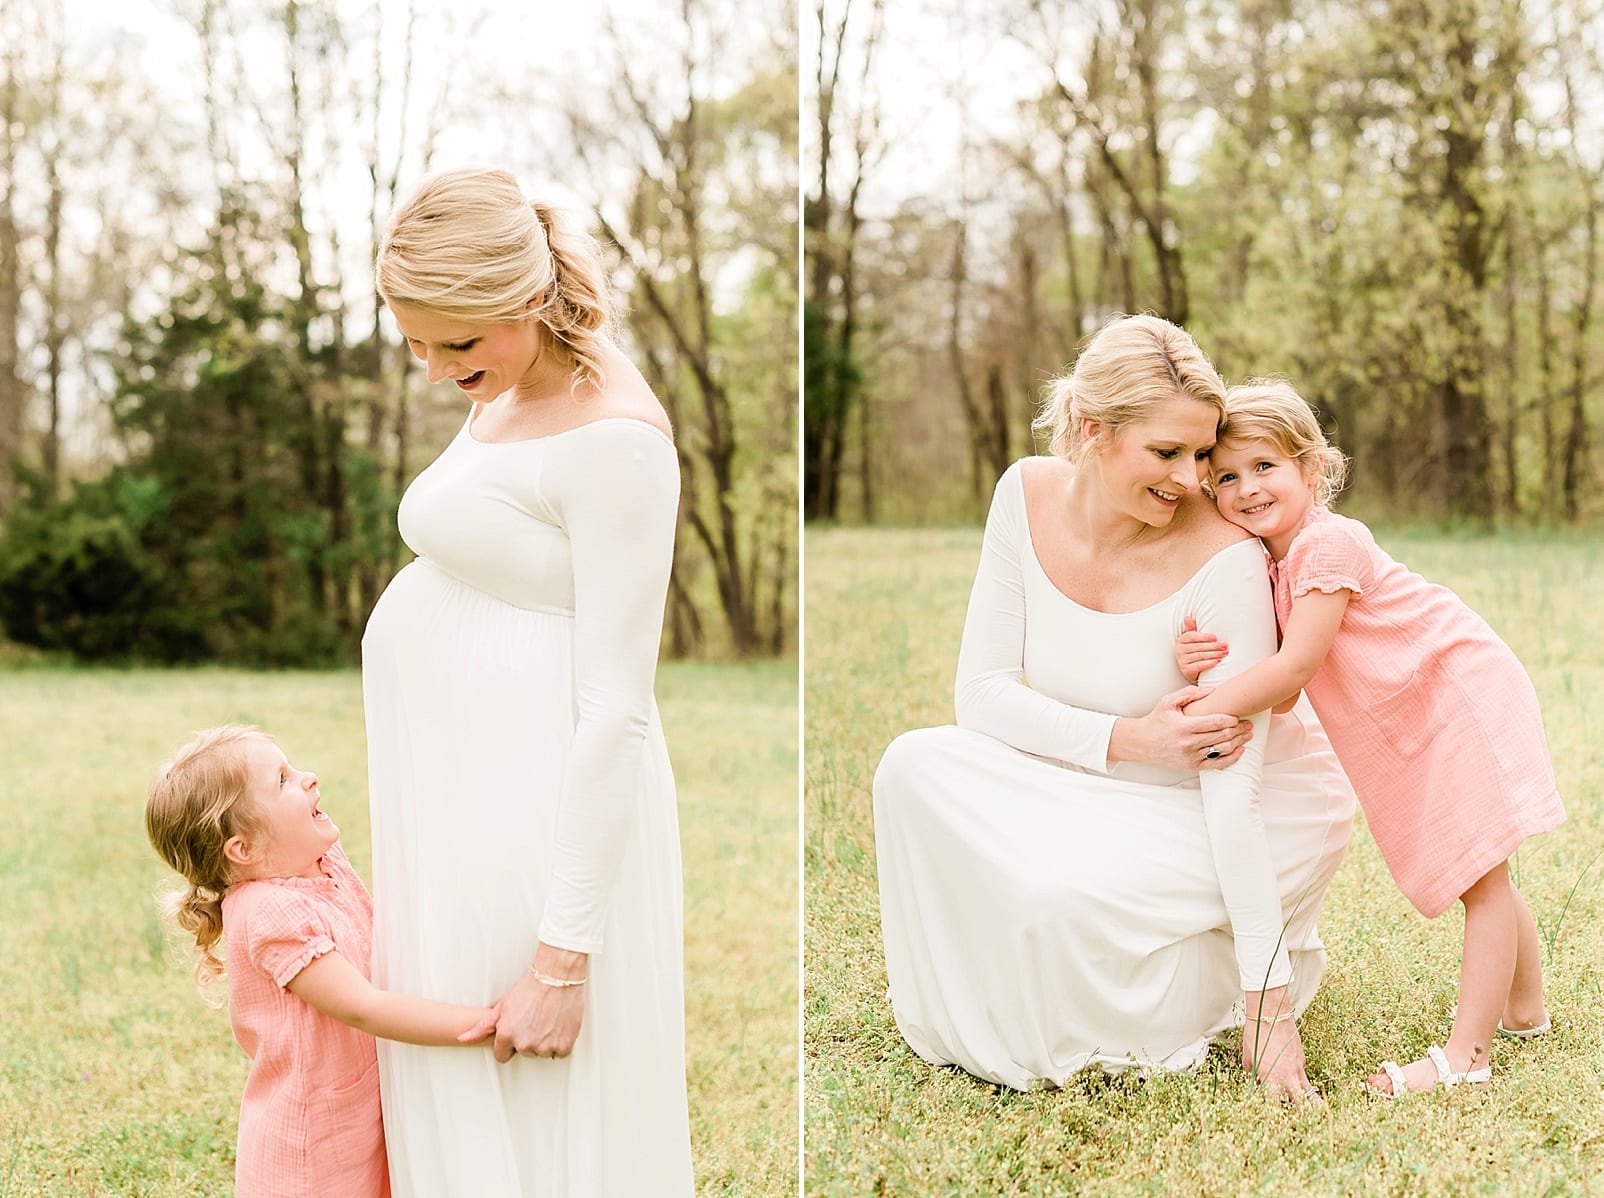 Wake Forest mother with her toddler daughter during maternity session photo